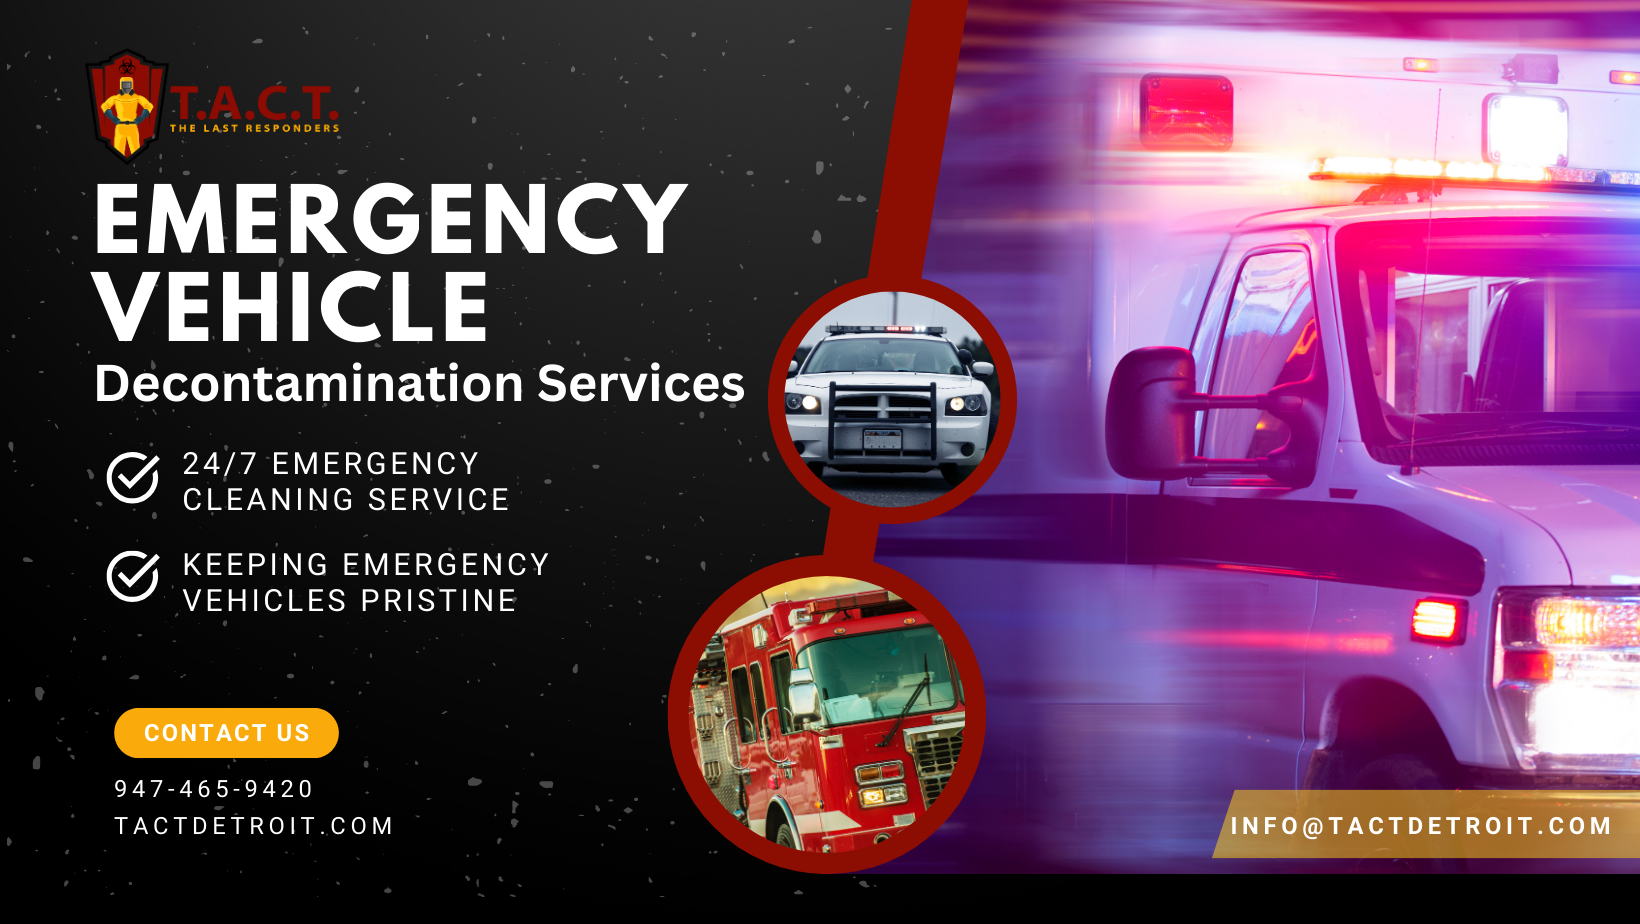 Ensure Safety with T.A.C.T. Detroit: Expert Emergency Vehicle Decontamination Services